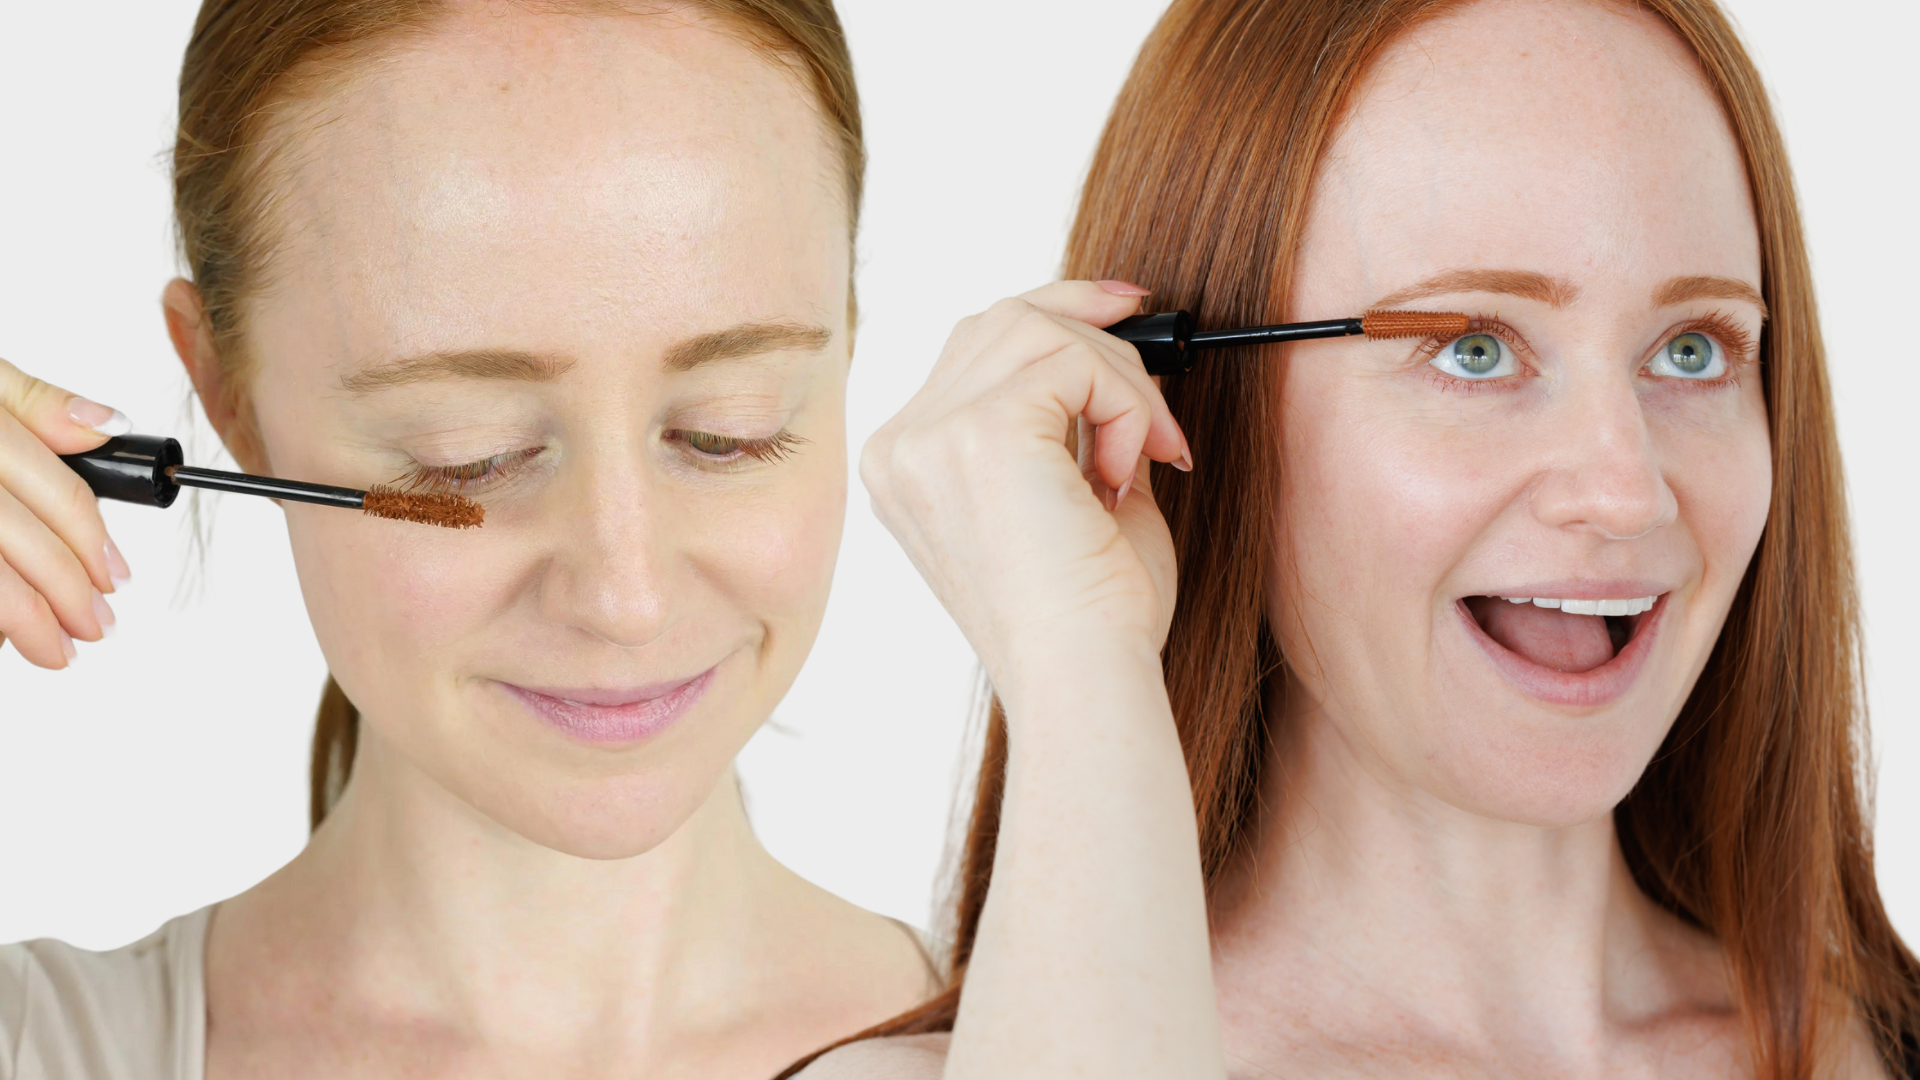 Redhead Makeup 101: The Correct Order To Apply Makeup Products